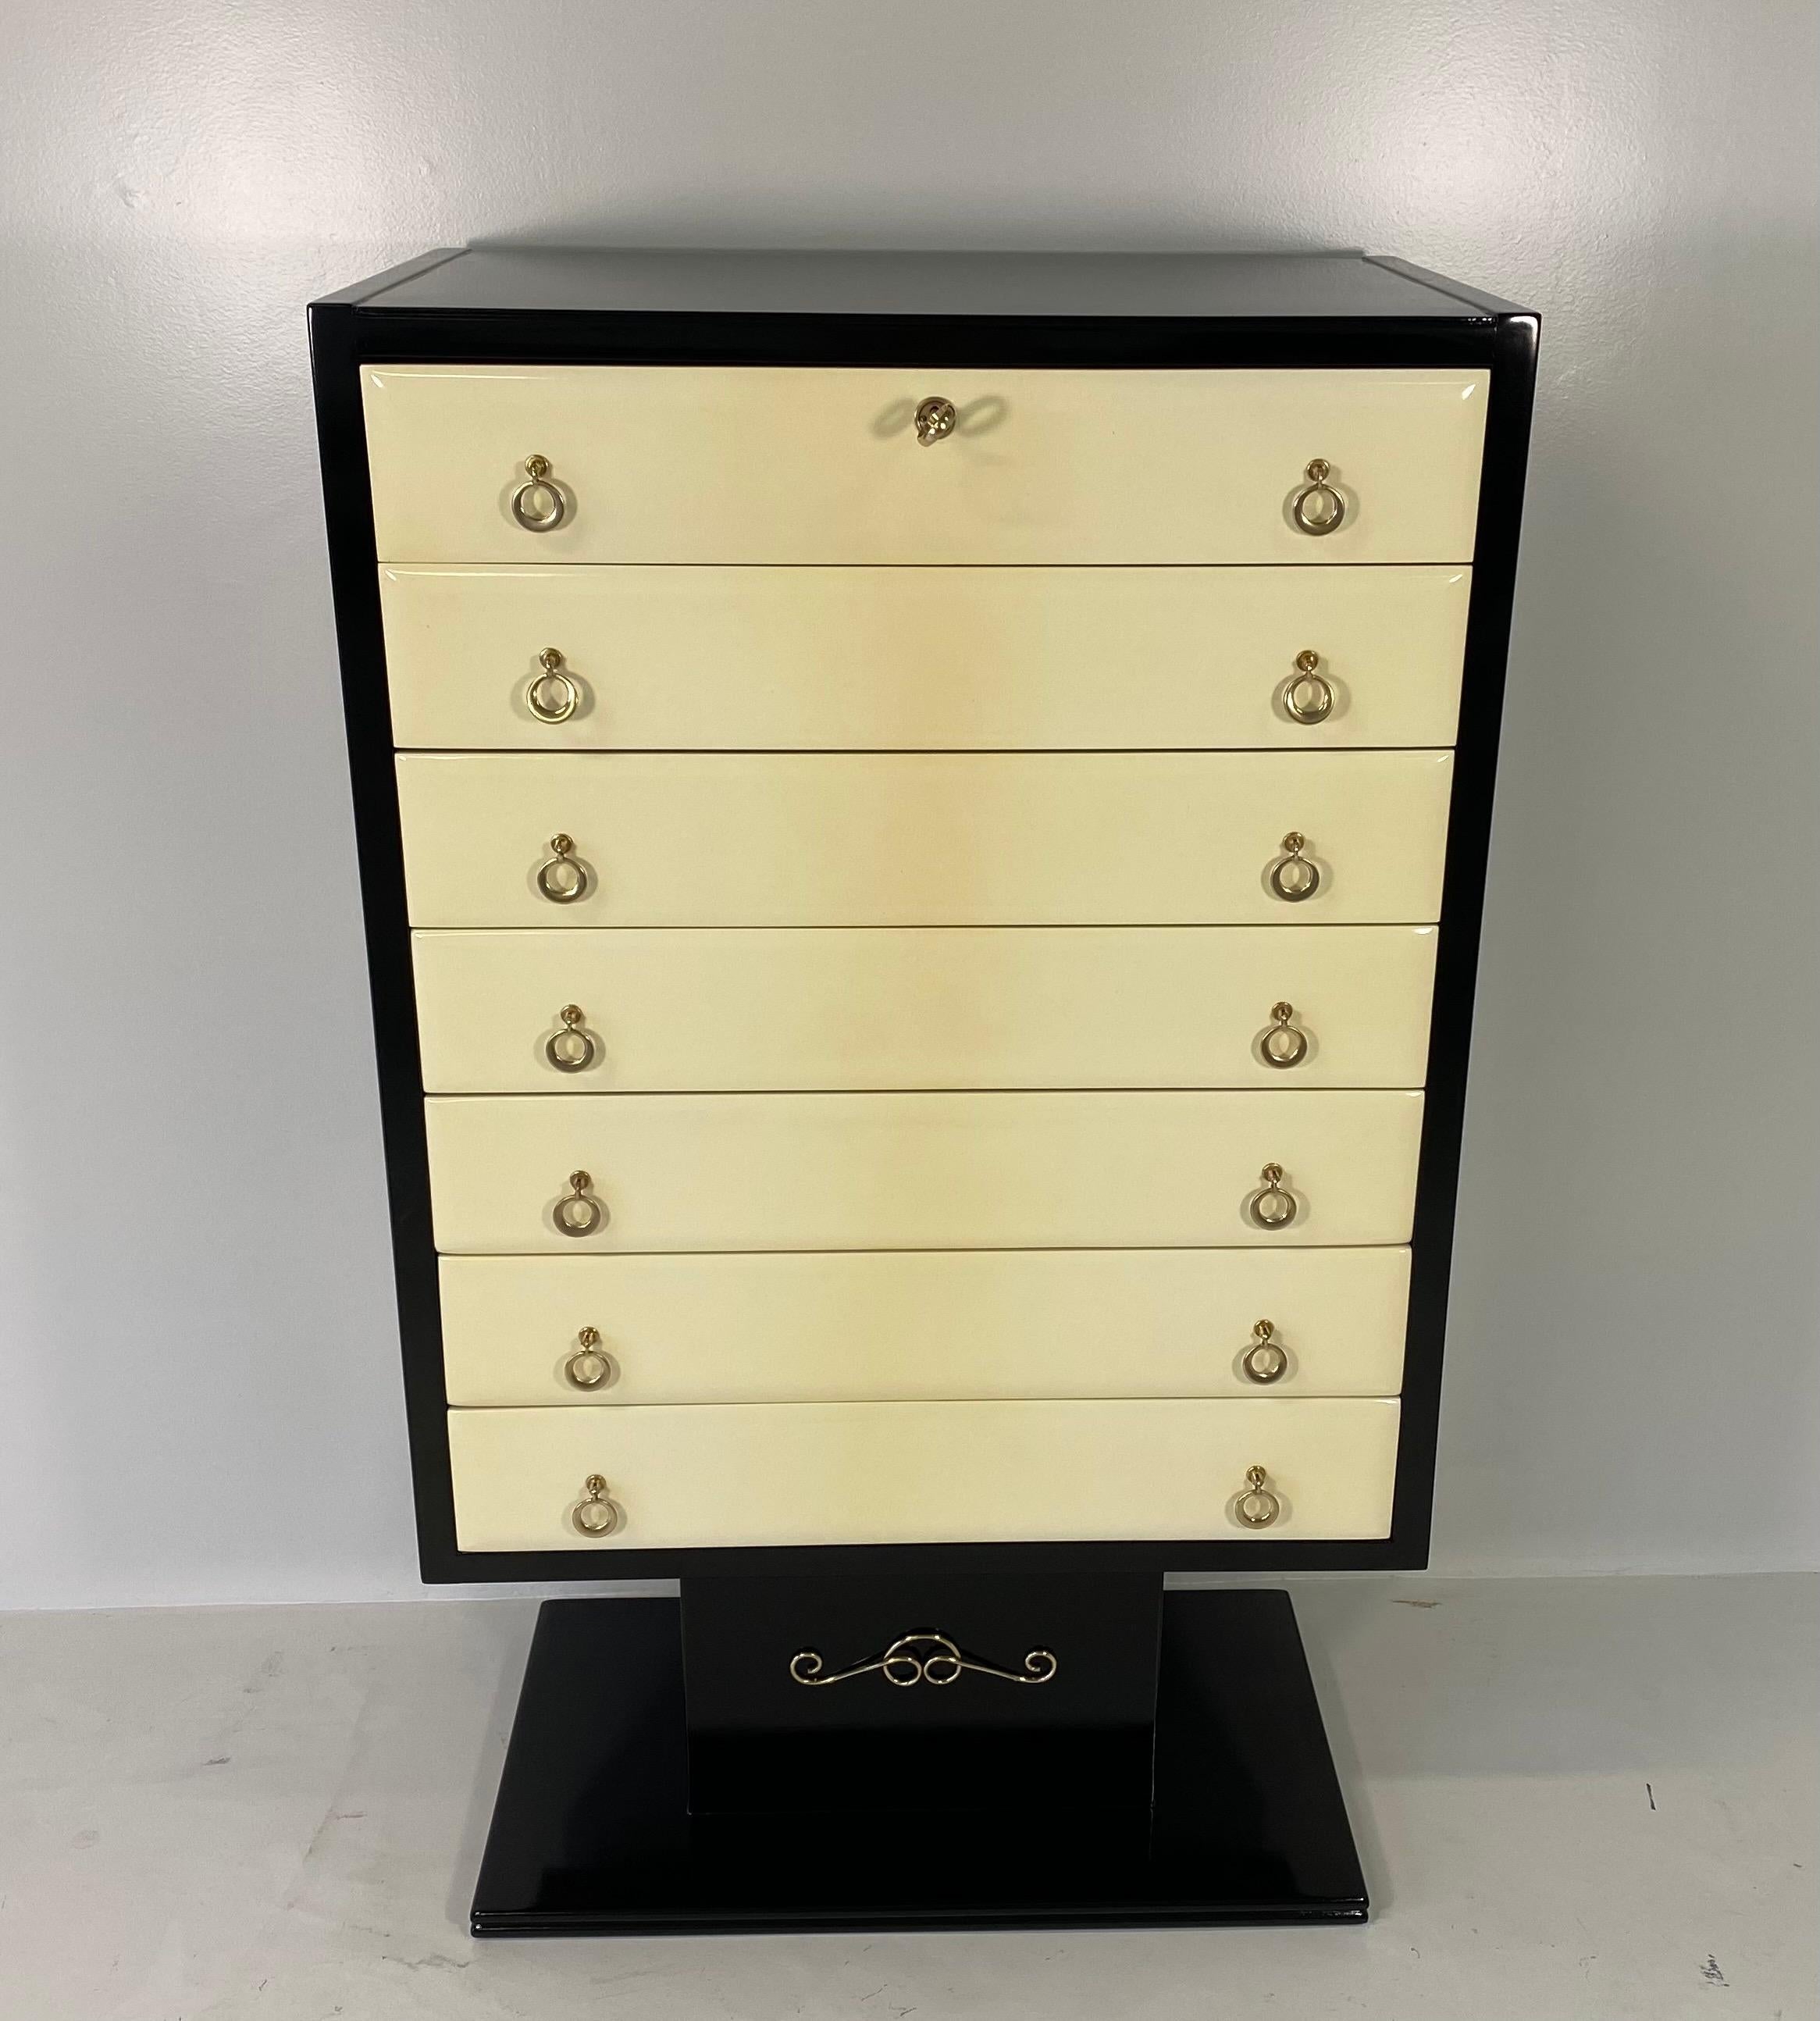 This elegant chest of drawers was produced in Italy in the early 1950s.
It is entirely black lacquered while the front of the drawers is lacquered ivory.
The handles and the decoration on the base are in brass.
Fully restored.